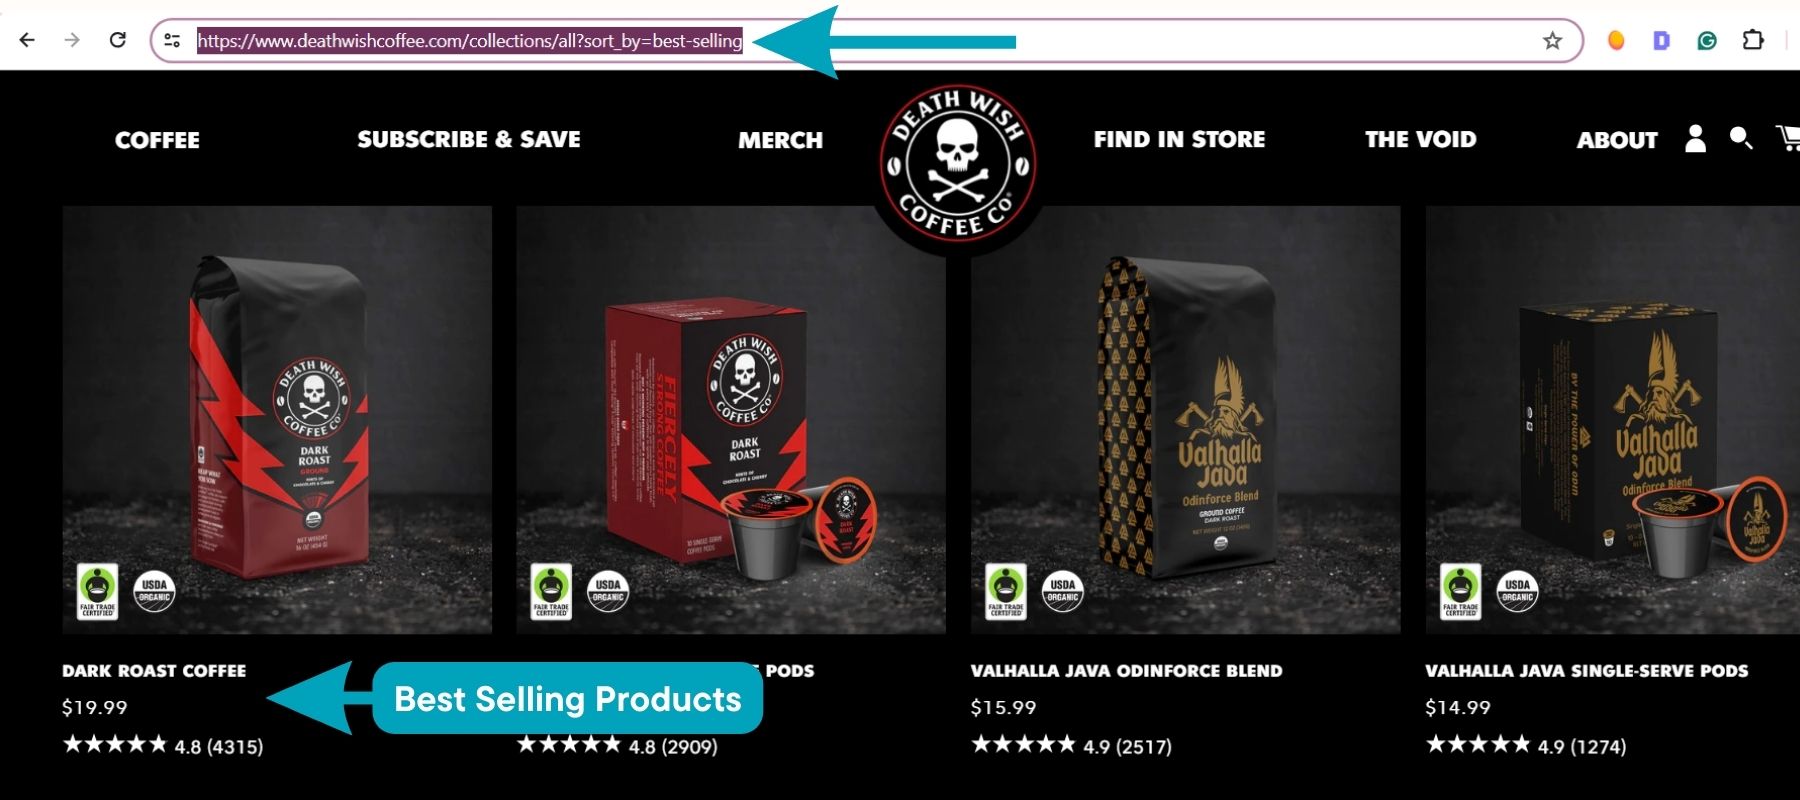 Death Wish Coffee's best selling products